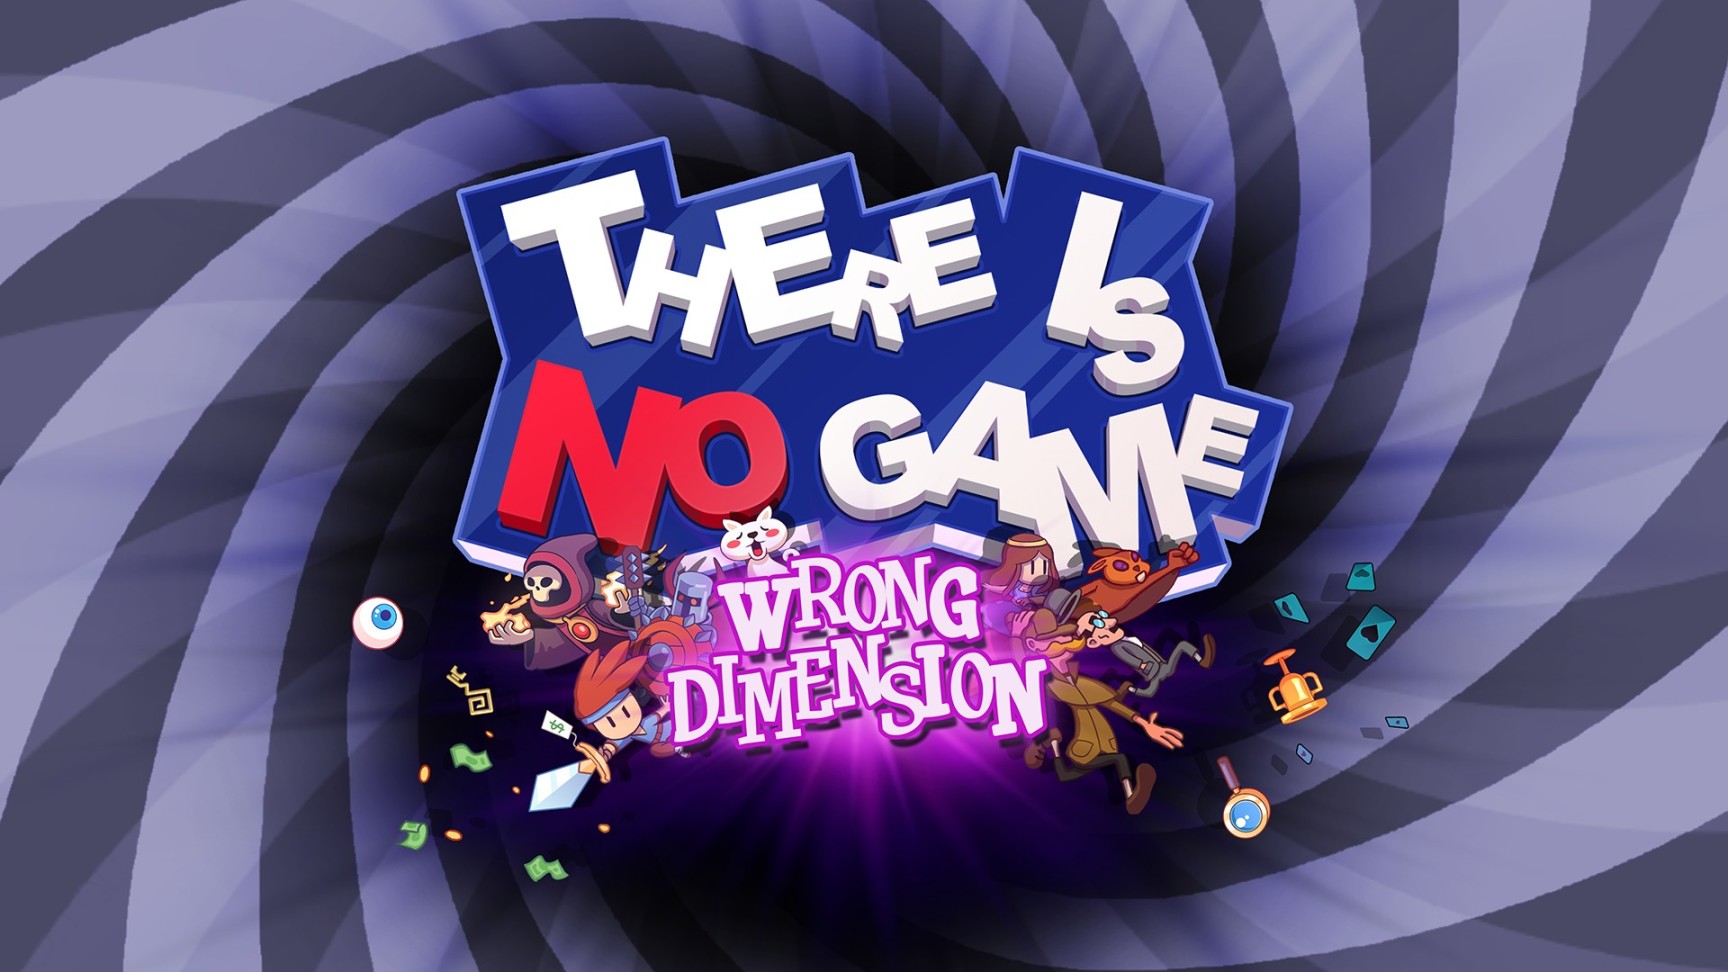 《There Is No Game : Wrong Dimension》：一封獻給玩家與遊戲製作者的情書